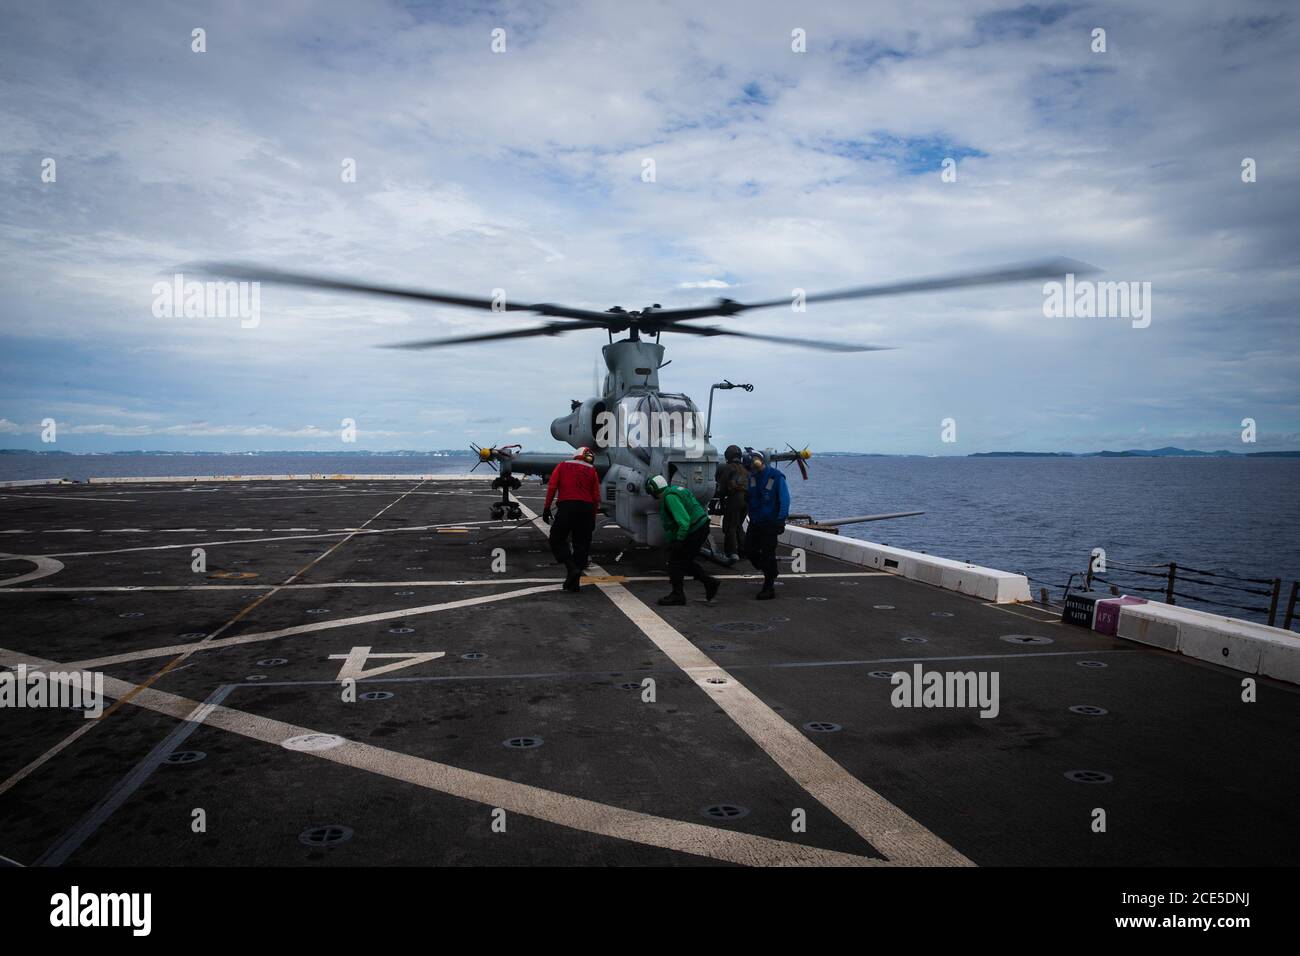 PHILIPPINE SEA (Aug. 22, 2020) Sailors aboard USS New Orleans (LPD 18) secure an AH-1Z Cobra helicopter with Marine Medium Tiltrotor Squadron 262 (Reinforced), 31st Marine Expeditionary Unit (MEU), to the flight deck. New Orleans, part of the Amphibious Ready Group (ARG), 31st Marine Expeditionary Unit (MEU) team, is operating in the U.S. 7th Fleet area of operation to enhance interoperability with allies and partners and serve as a ready response force to defend peace and stability in the Indo-Pacific region. The America ARG, 31st MEU team remains the premier crisis response force in the regi Stock Photo